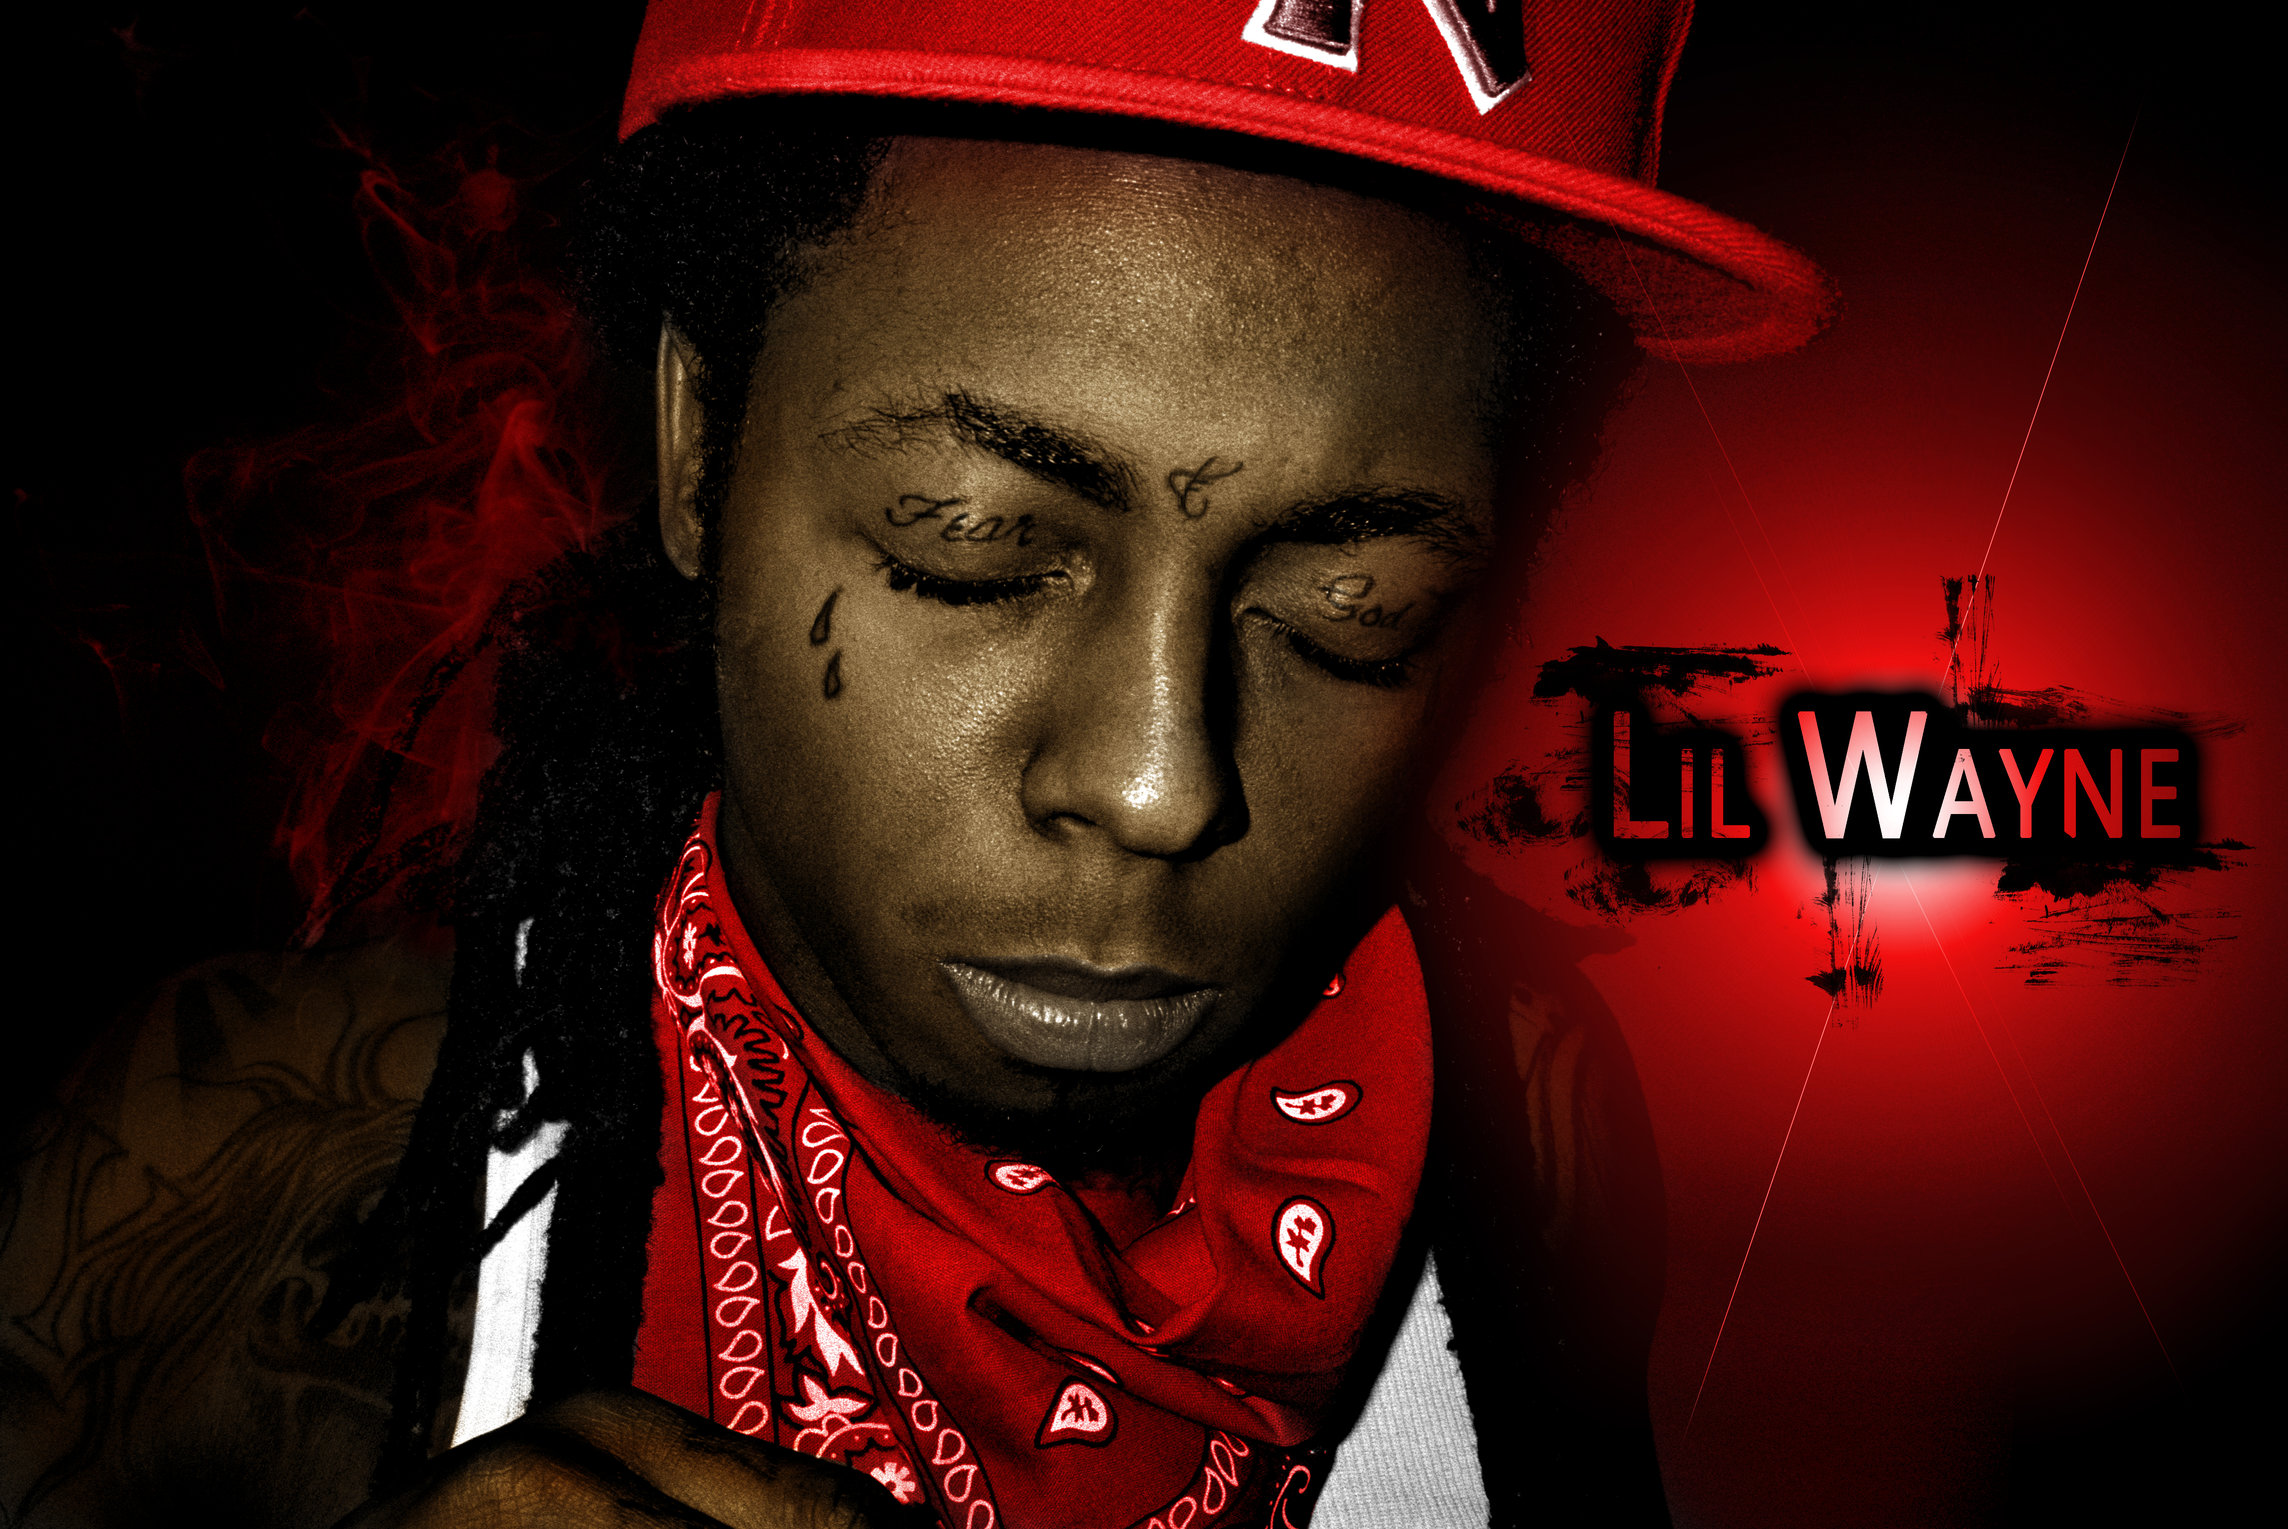 Old Lil Wayne Black and White picture colored   Page 2 2288x1529